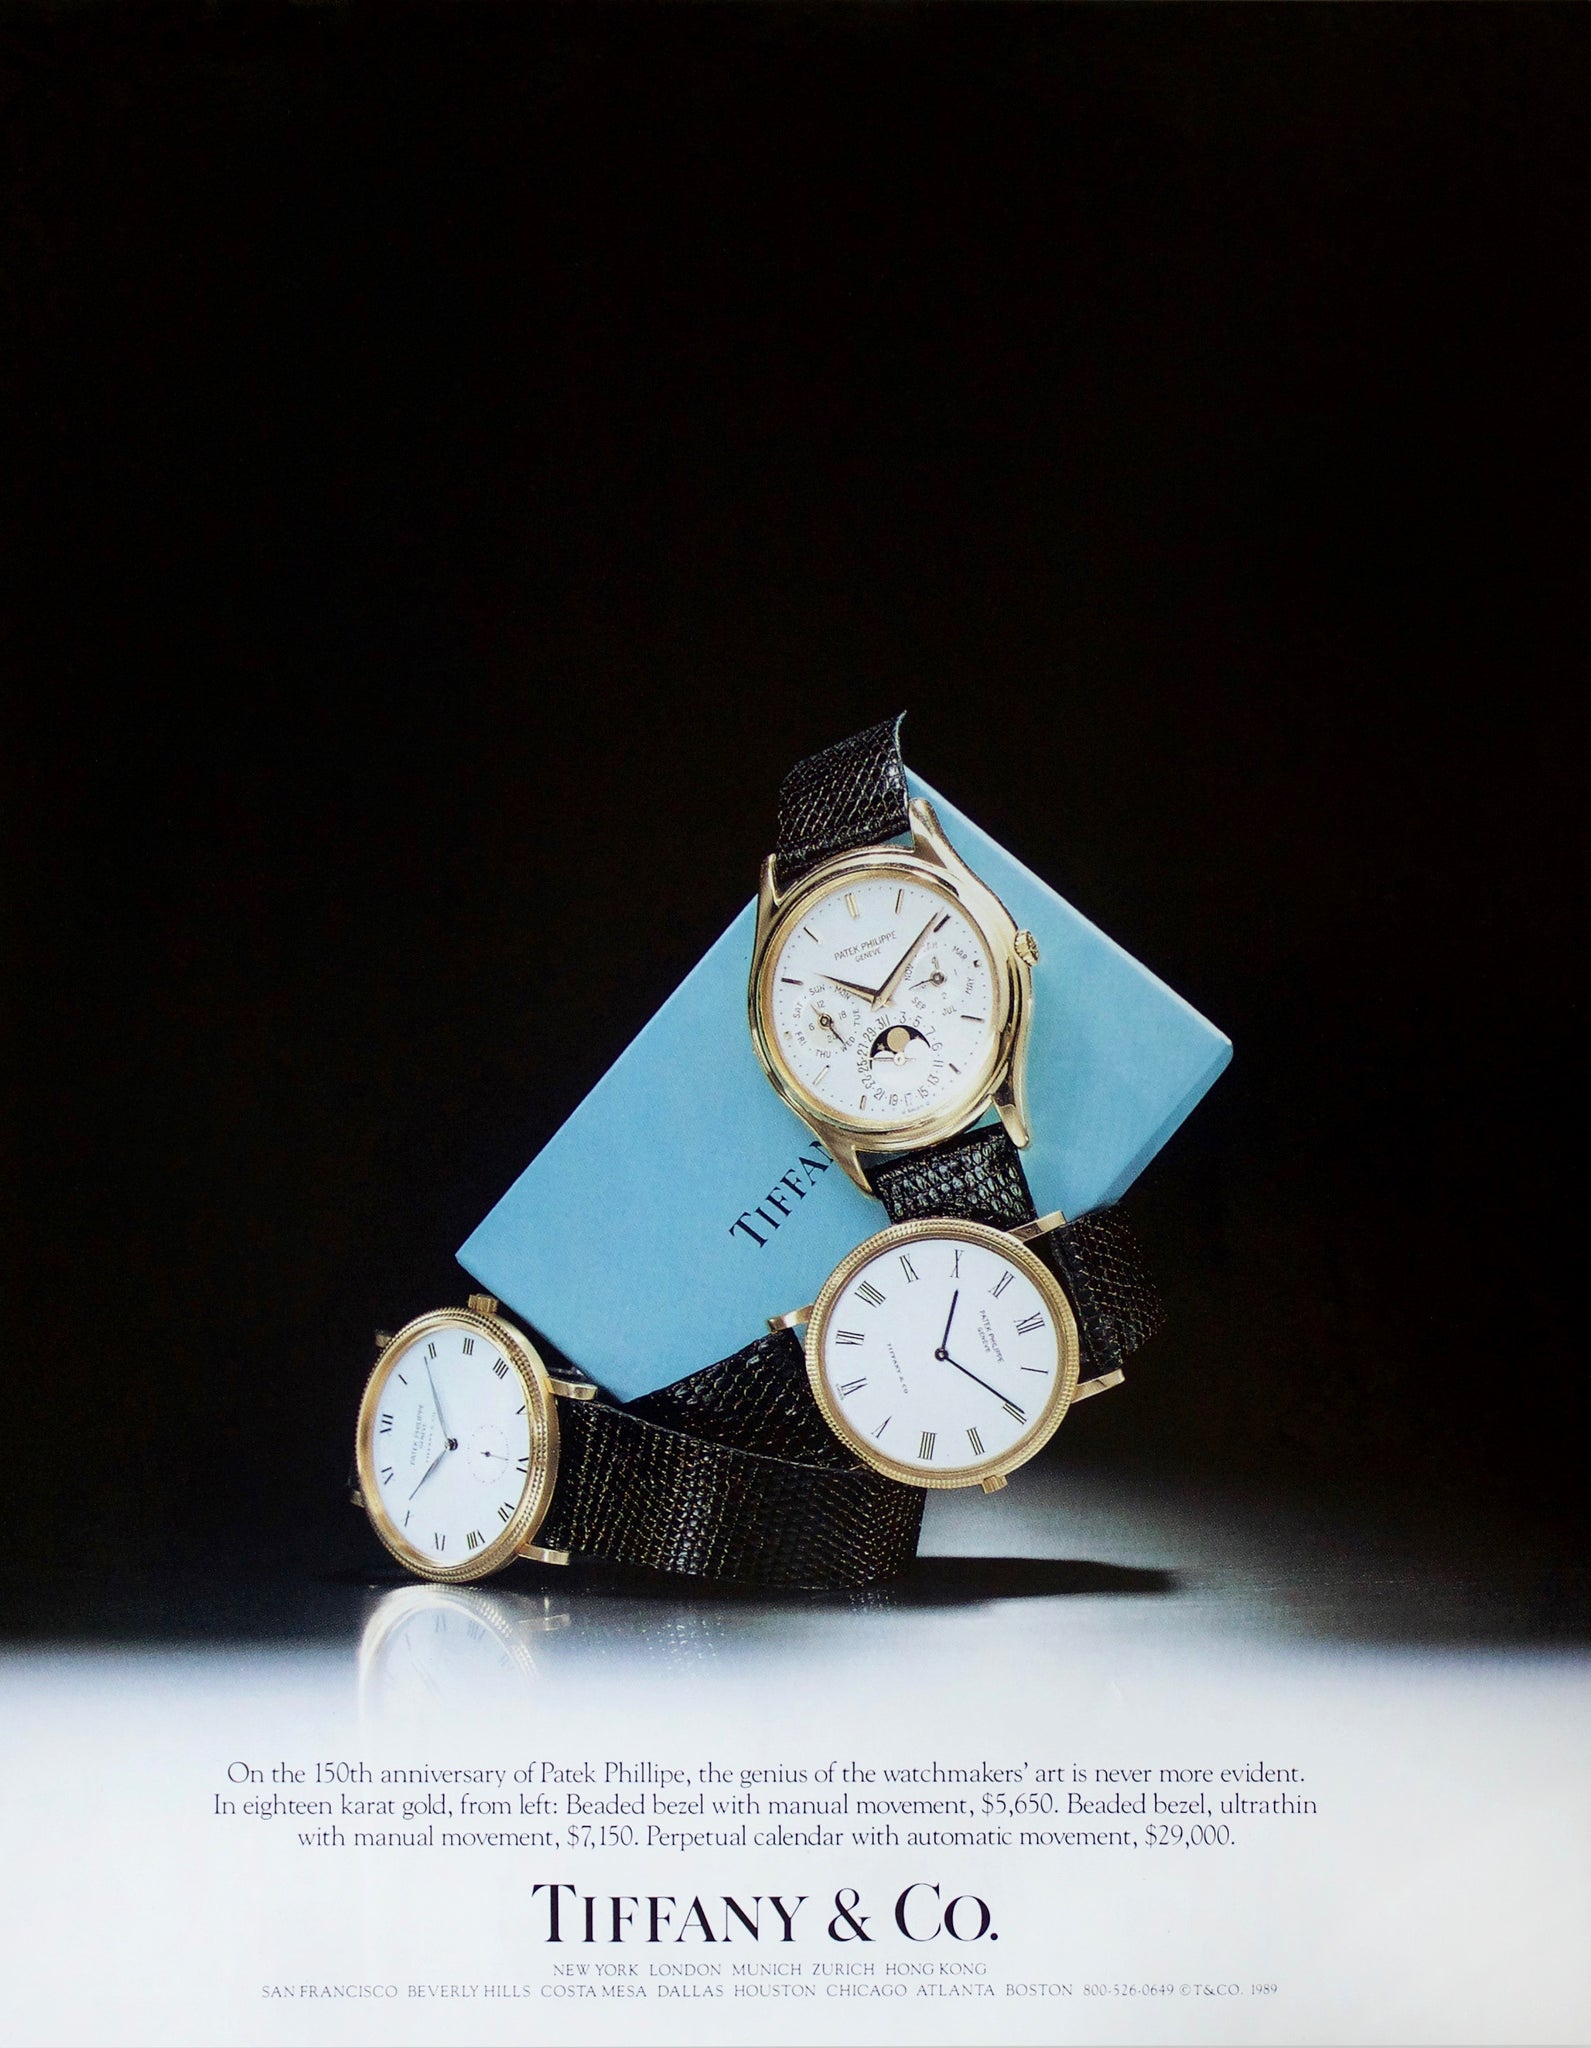 Tiffany & Co advertisement from 1989 that includes a Patek Philippe 3940 